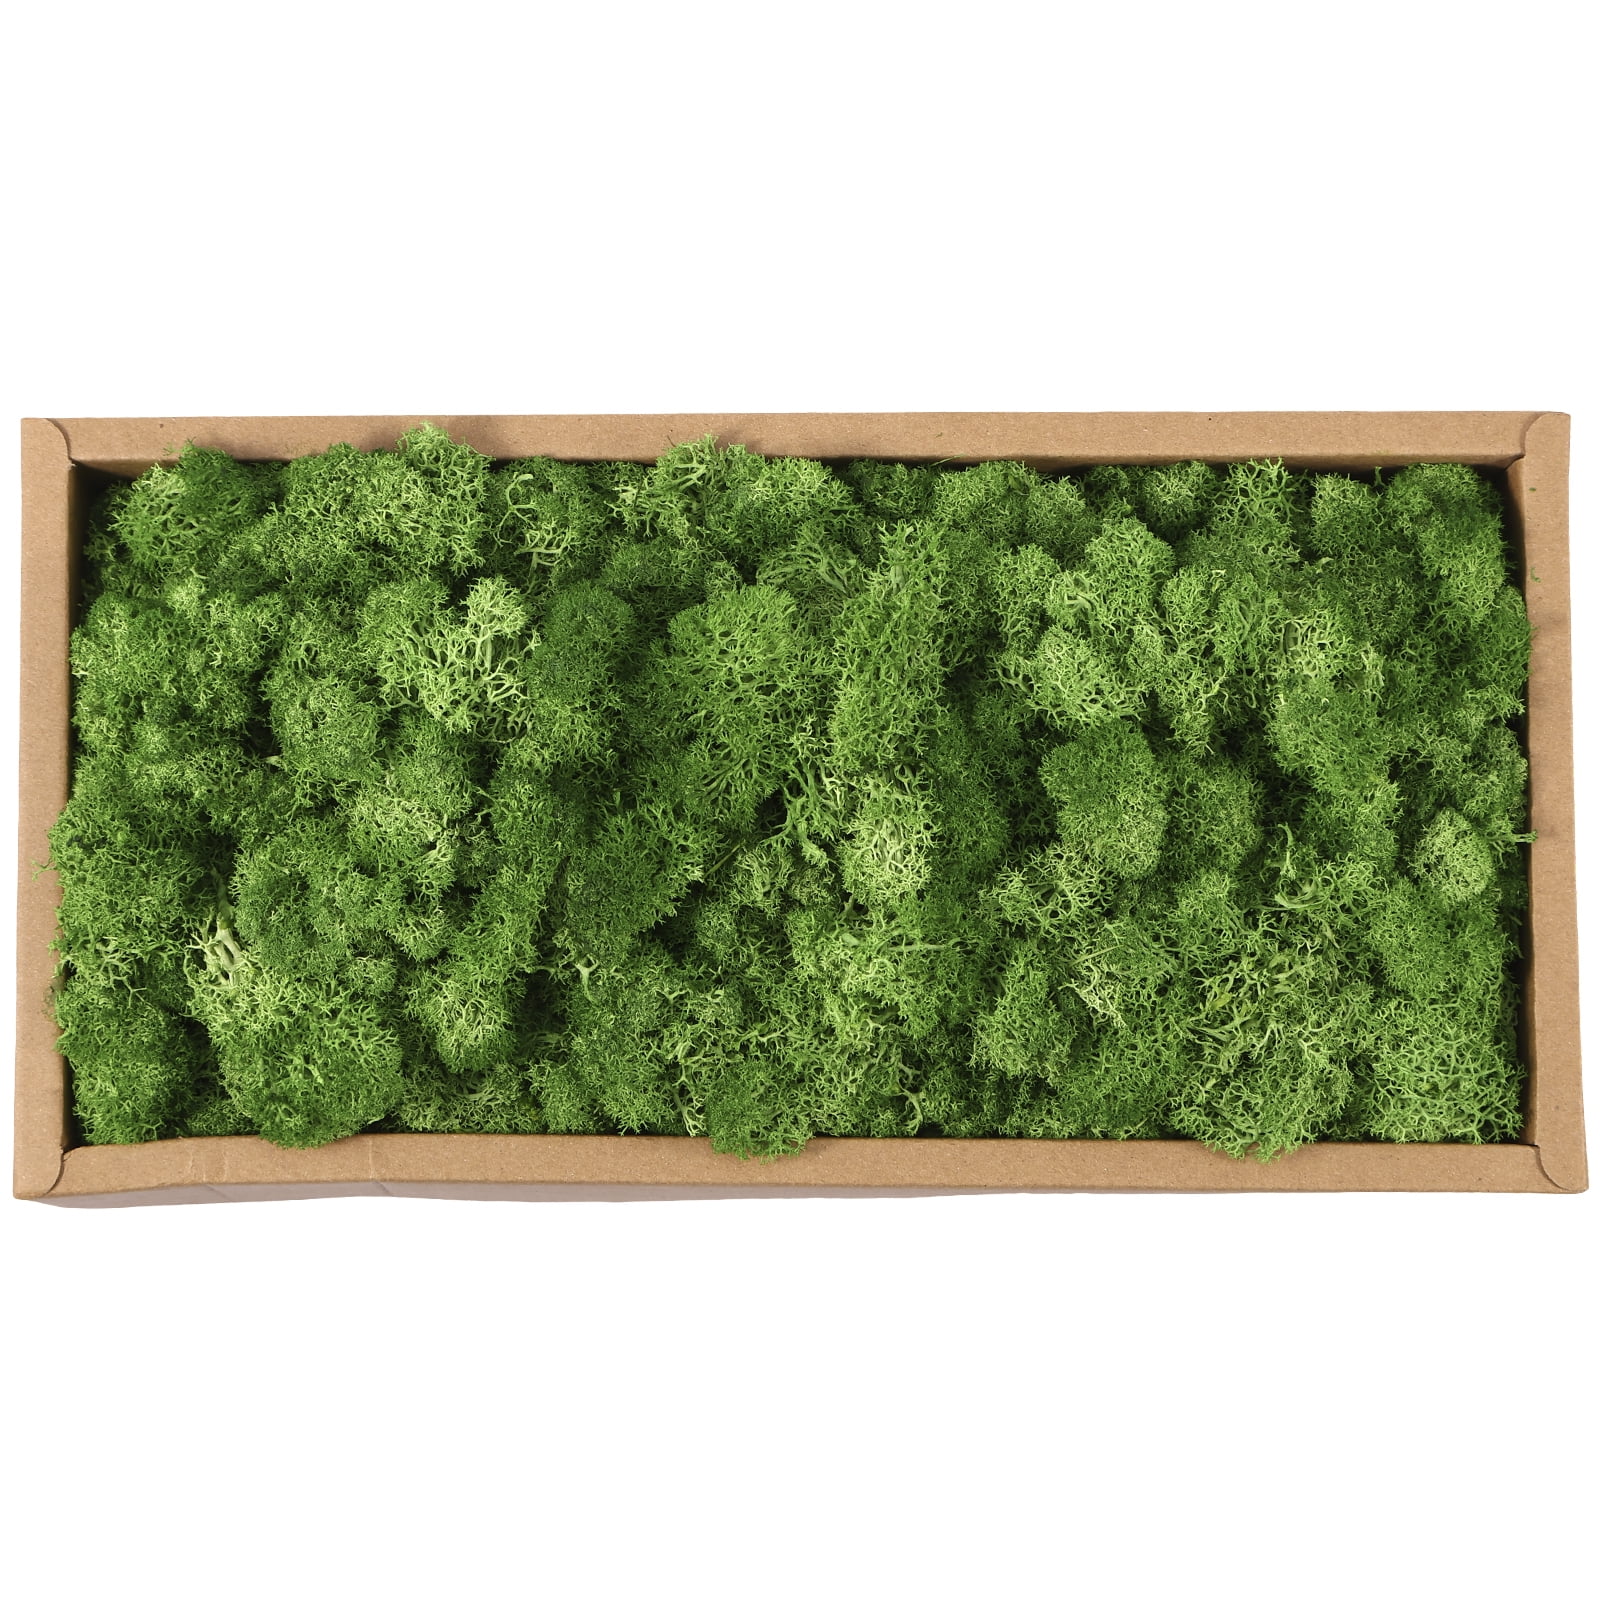 TCYPUHL Preserved Moss for Crafts Dark Green Reindeer Moss for Potted  Plants, Craft Decorative Moss Decor for Wall Art, Dried Moss(7oz, Dark  Green)